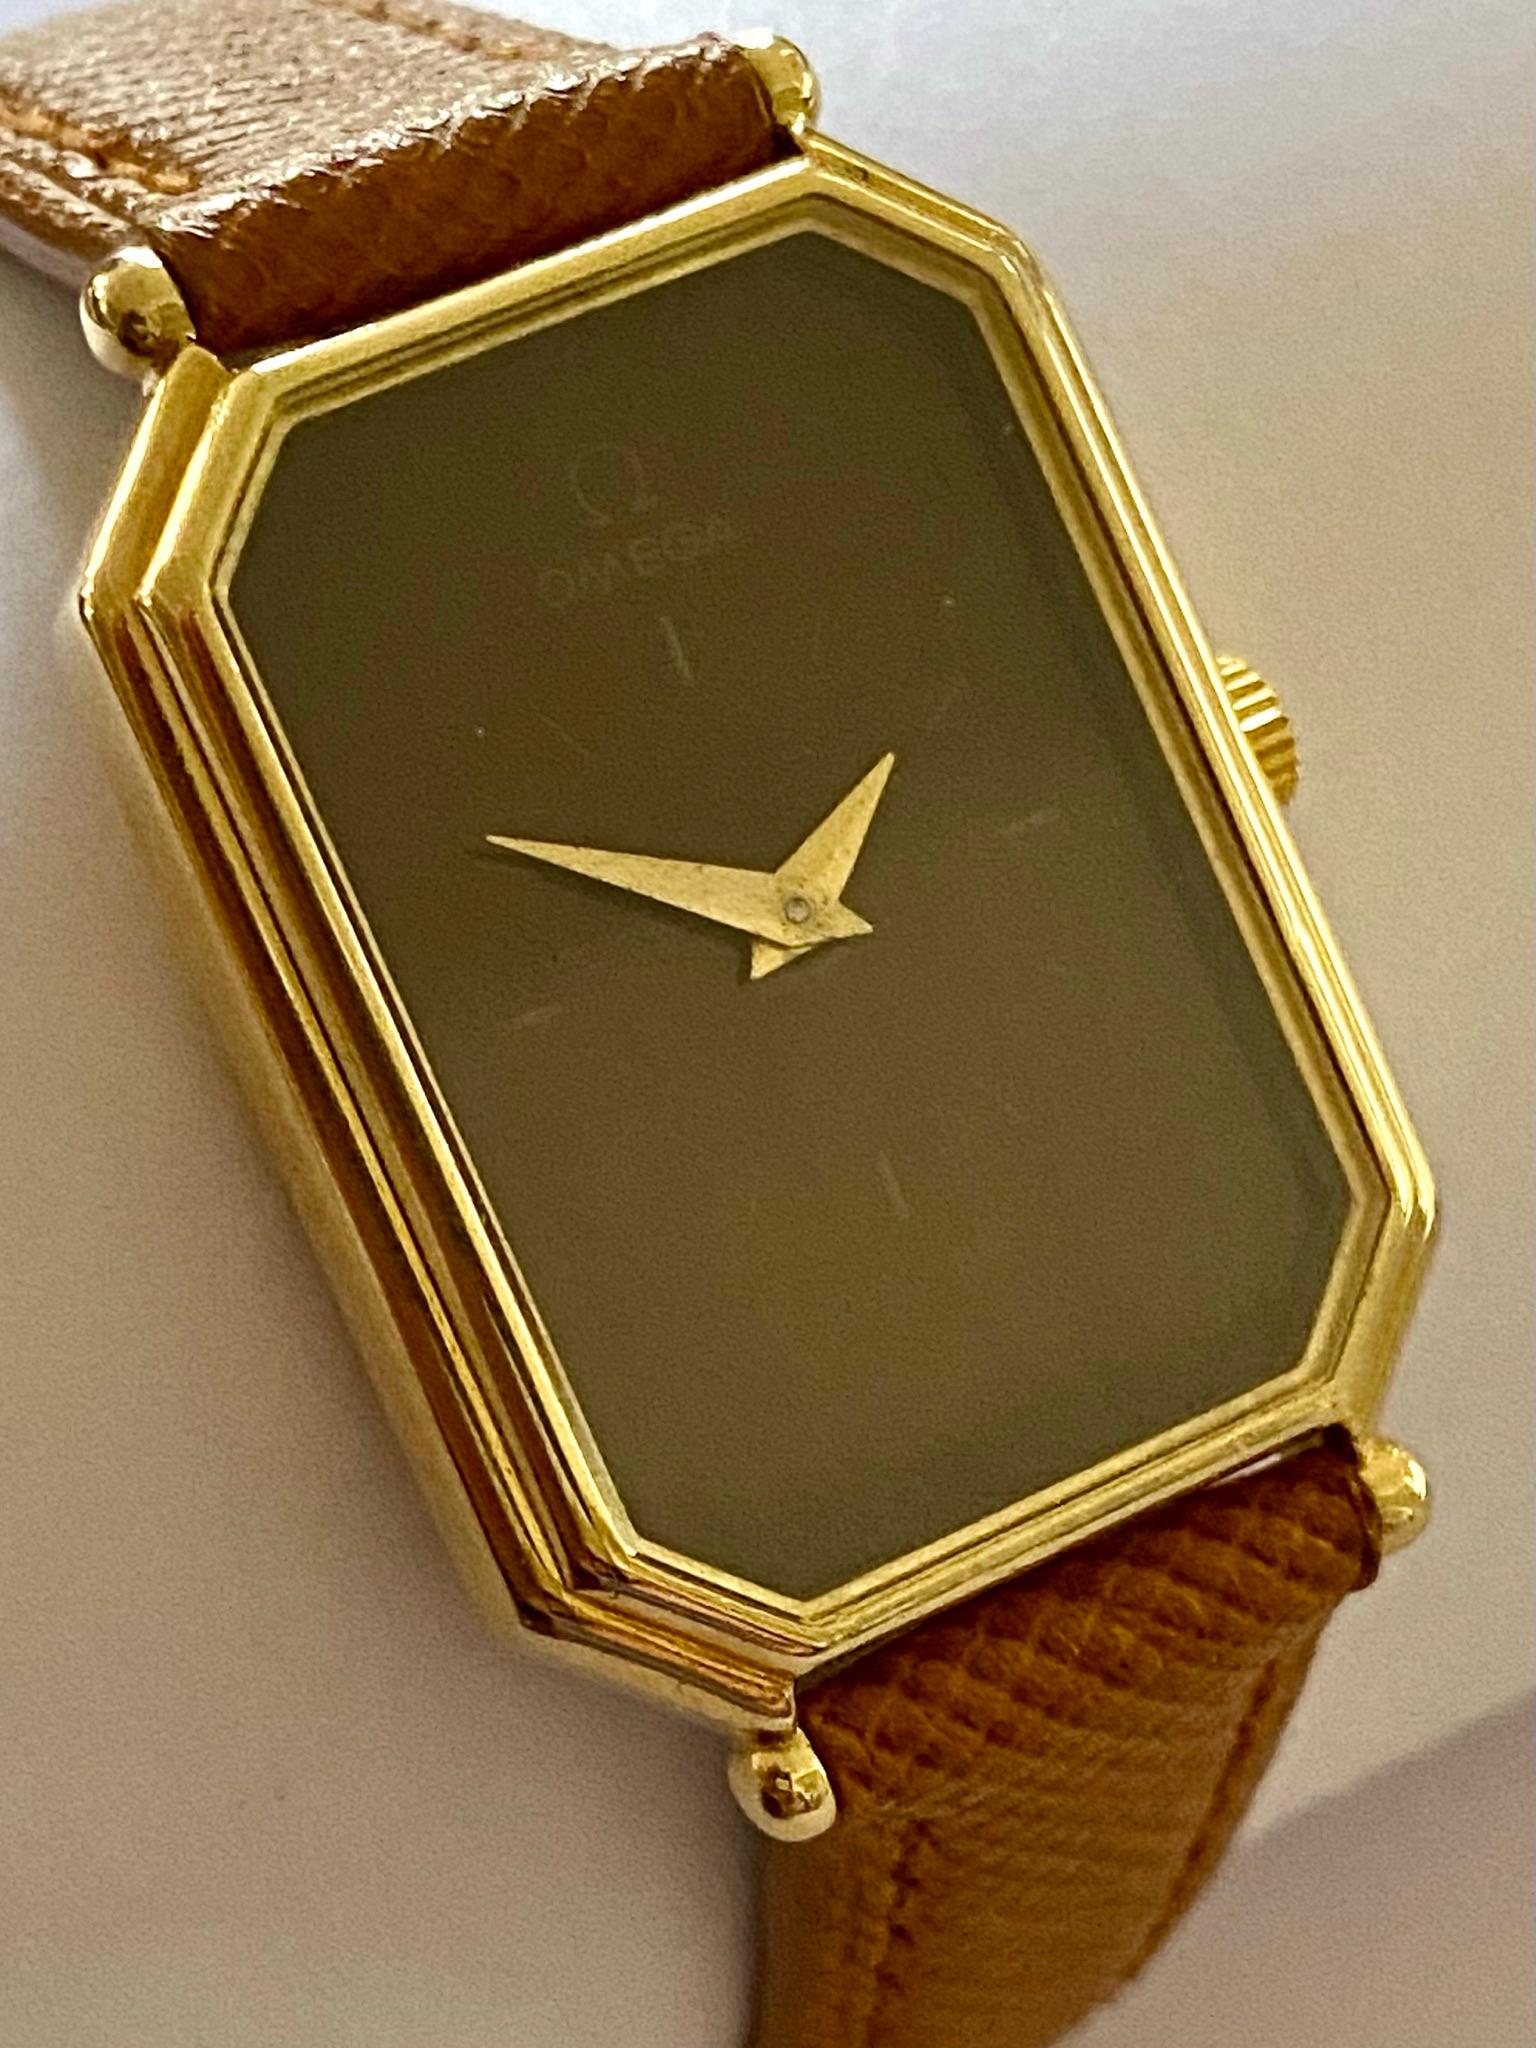 One (1) 18K. Yellow Gold Watch, Handwinding mouvement, Leather Strap.
Brand: Omega,  de Ville with a Brownish Dial,   NR: 8381
Mouvemnenrt caliber Omega 625     Nr: 43343280  (ca `1979)
Original watch , with original Omega Strap, Crown,  Box and